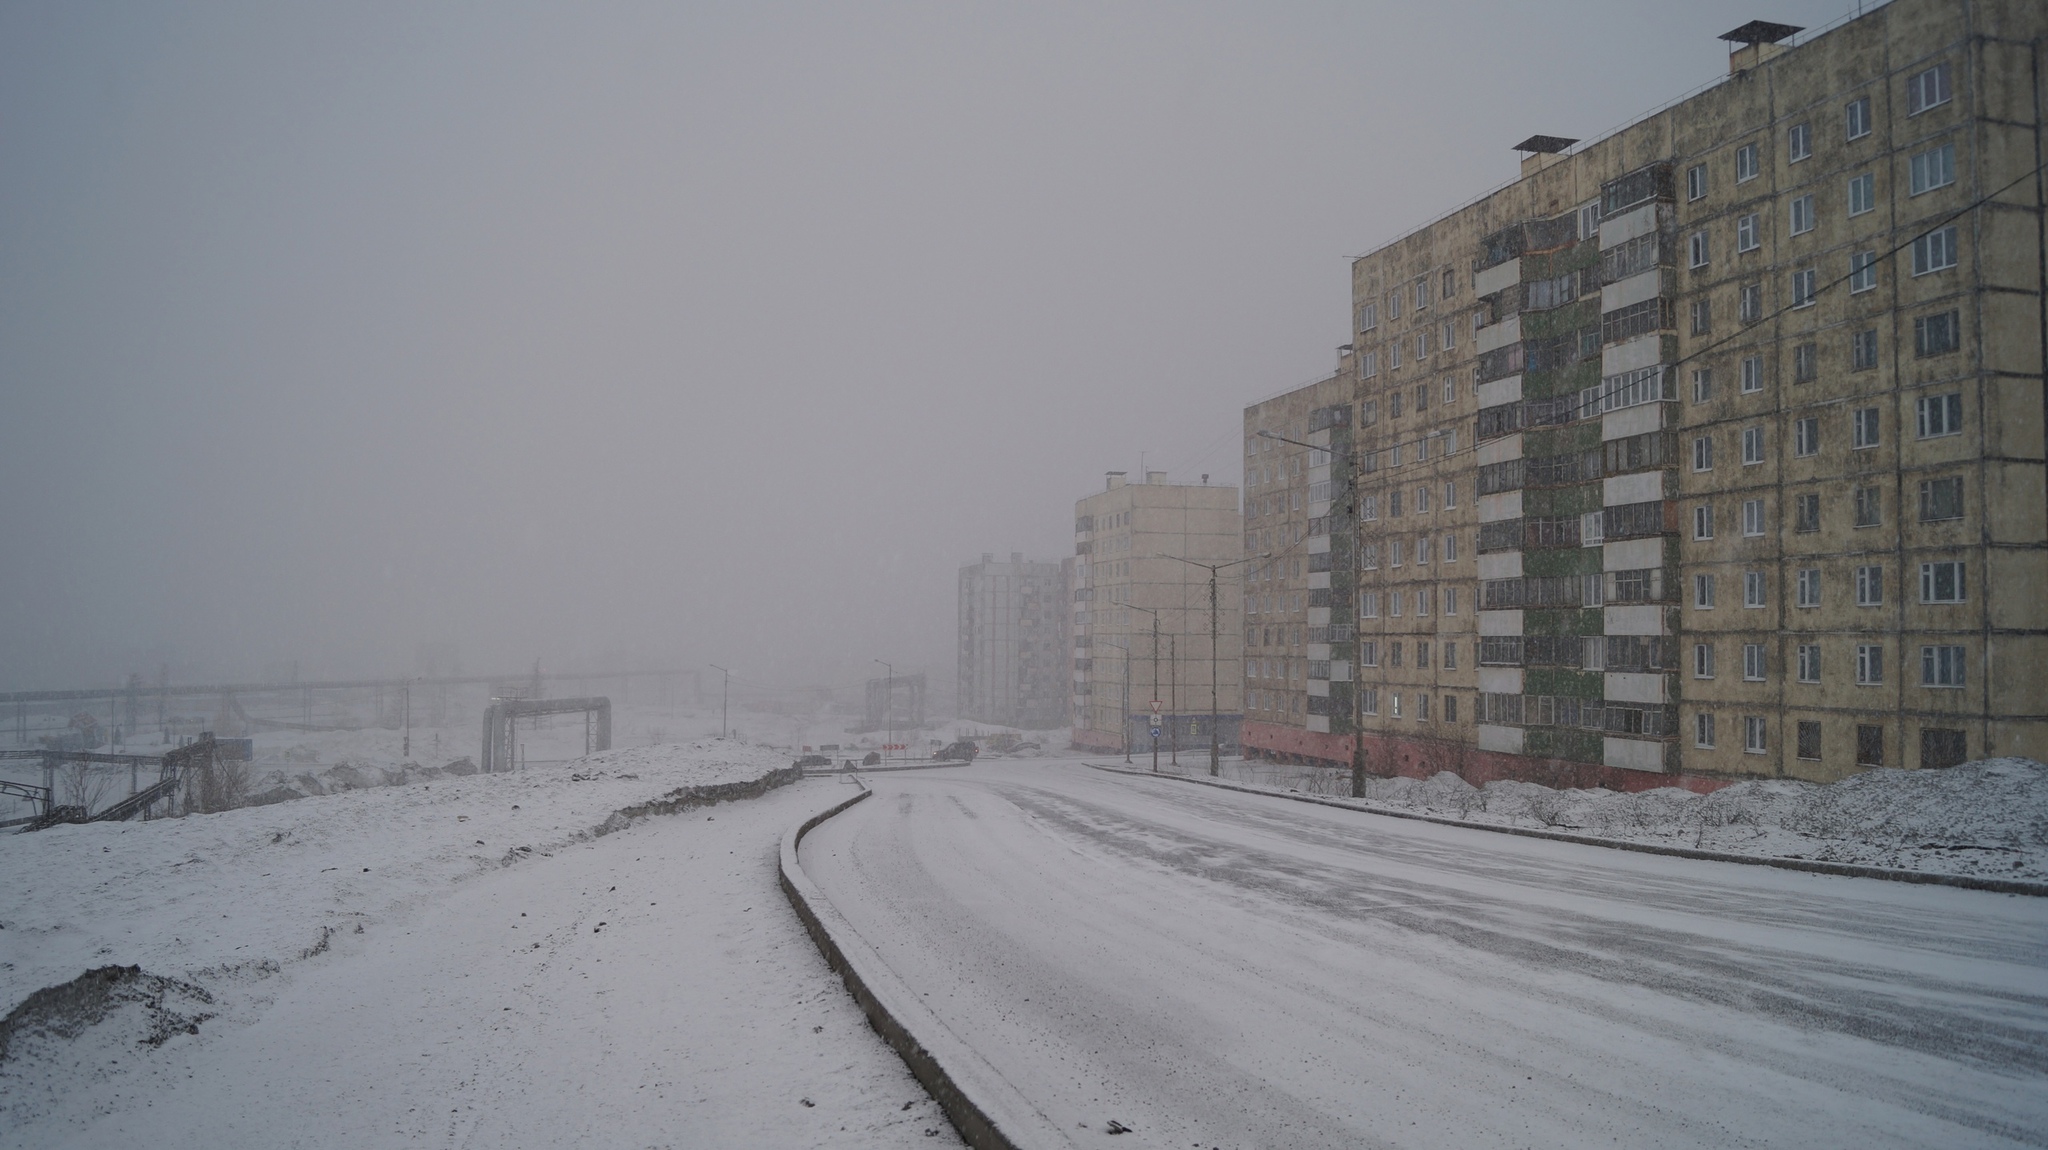 There is no summer here - My, Norilsk, May, North, Snow, Talnakh, Longpost